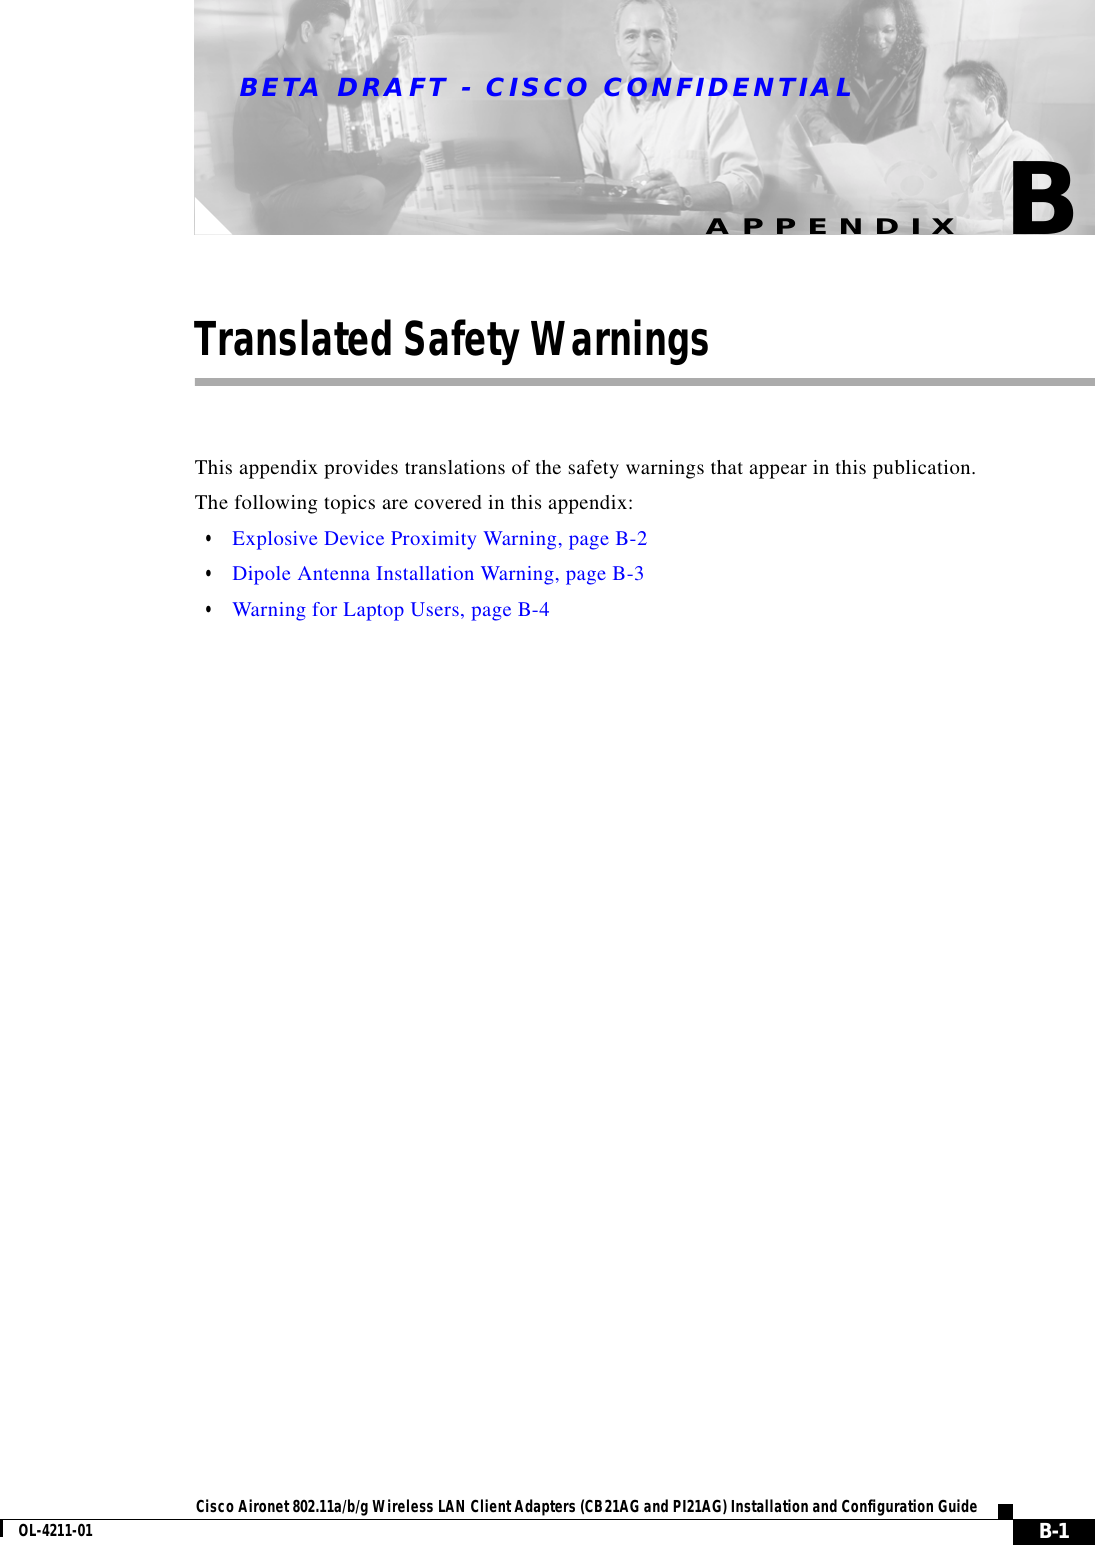 BETA DRAFT - CISCO CONFIDENTIALB-1Cisco Aironet 802.11a/b/g Wireless LAN Client Adapters (CB21AG and PI21AG) Installation and Configuration GuideOL-4211-01APPENDIXBTranslated Safety WarningsThis appendix provides translations of the safety warnings that appear in this publication.The following topics are covered in this appendix:•Explosive Device Proximity Warning, page B-2•Dipole Antenna Installation Warning, page B-3•Warning for Laptop Users, page B-4